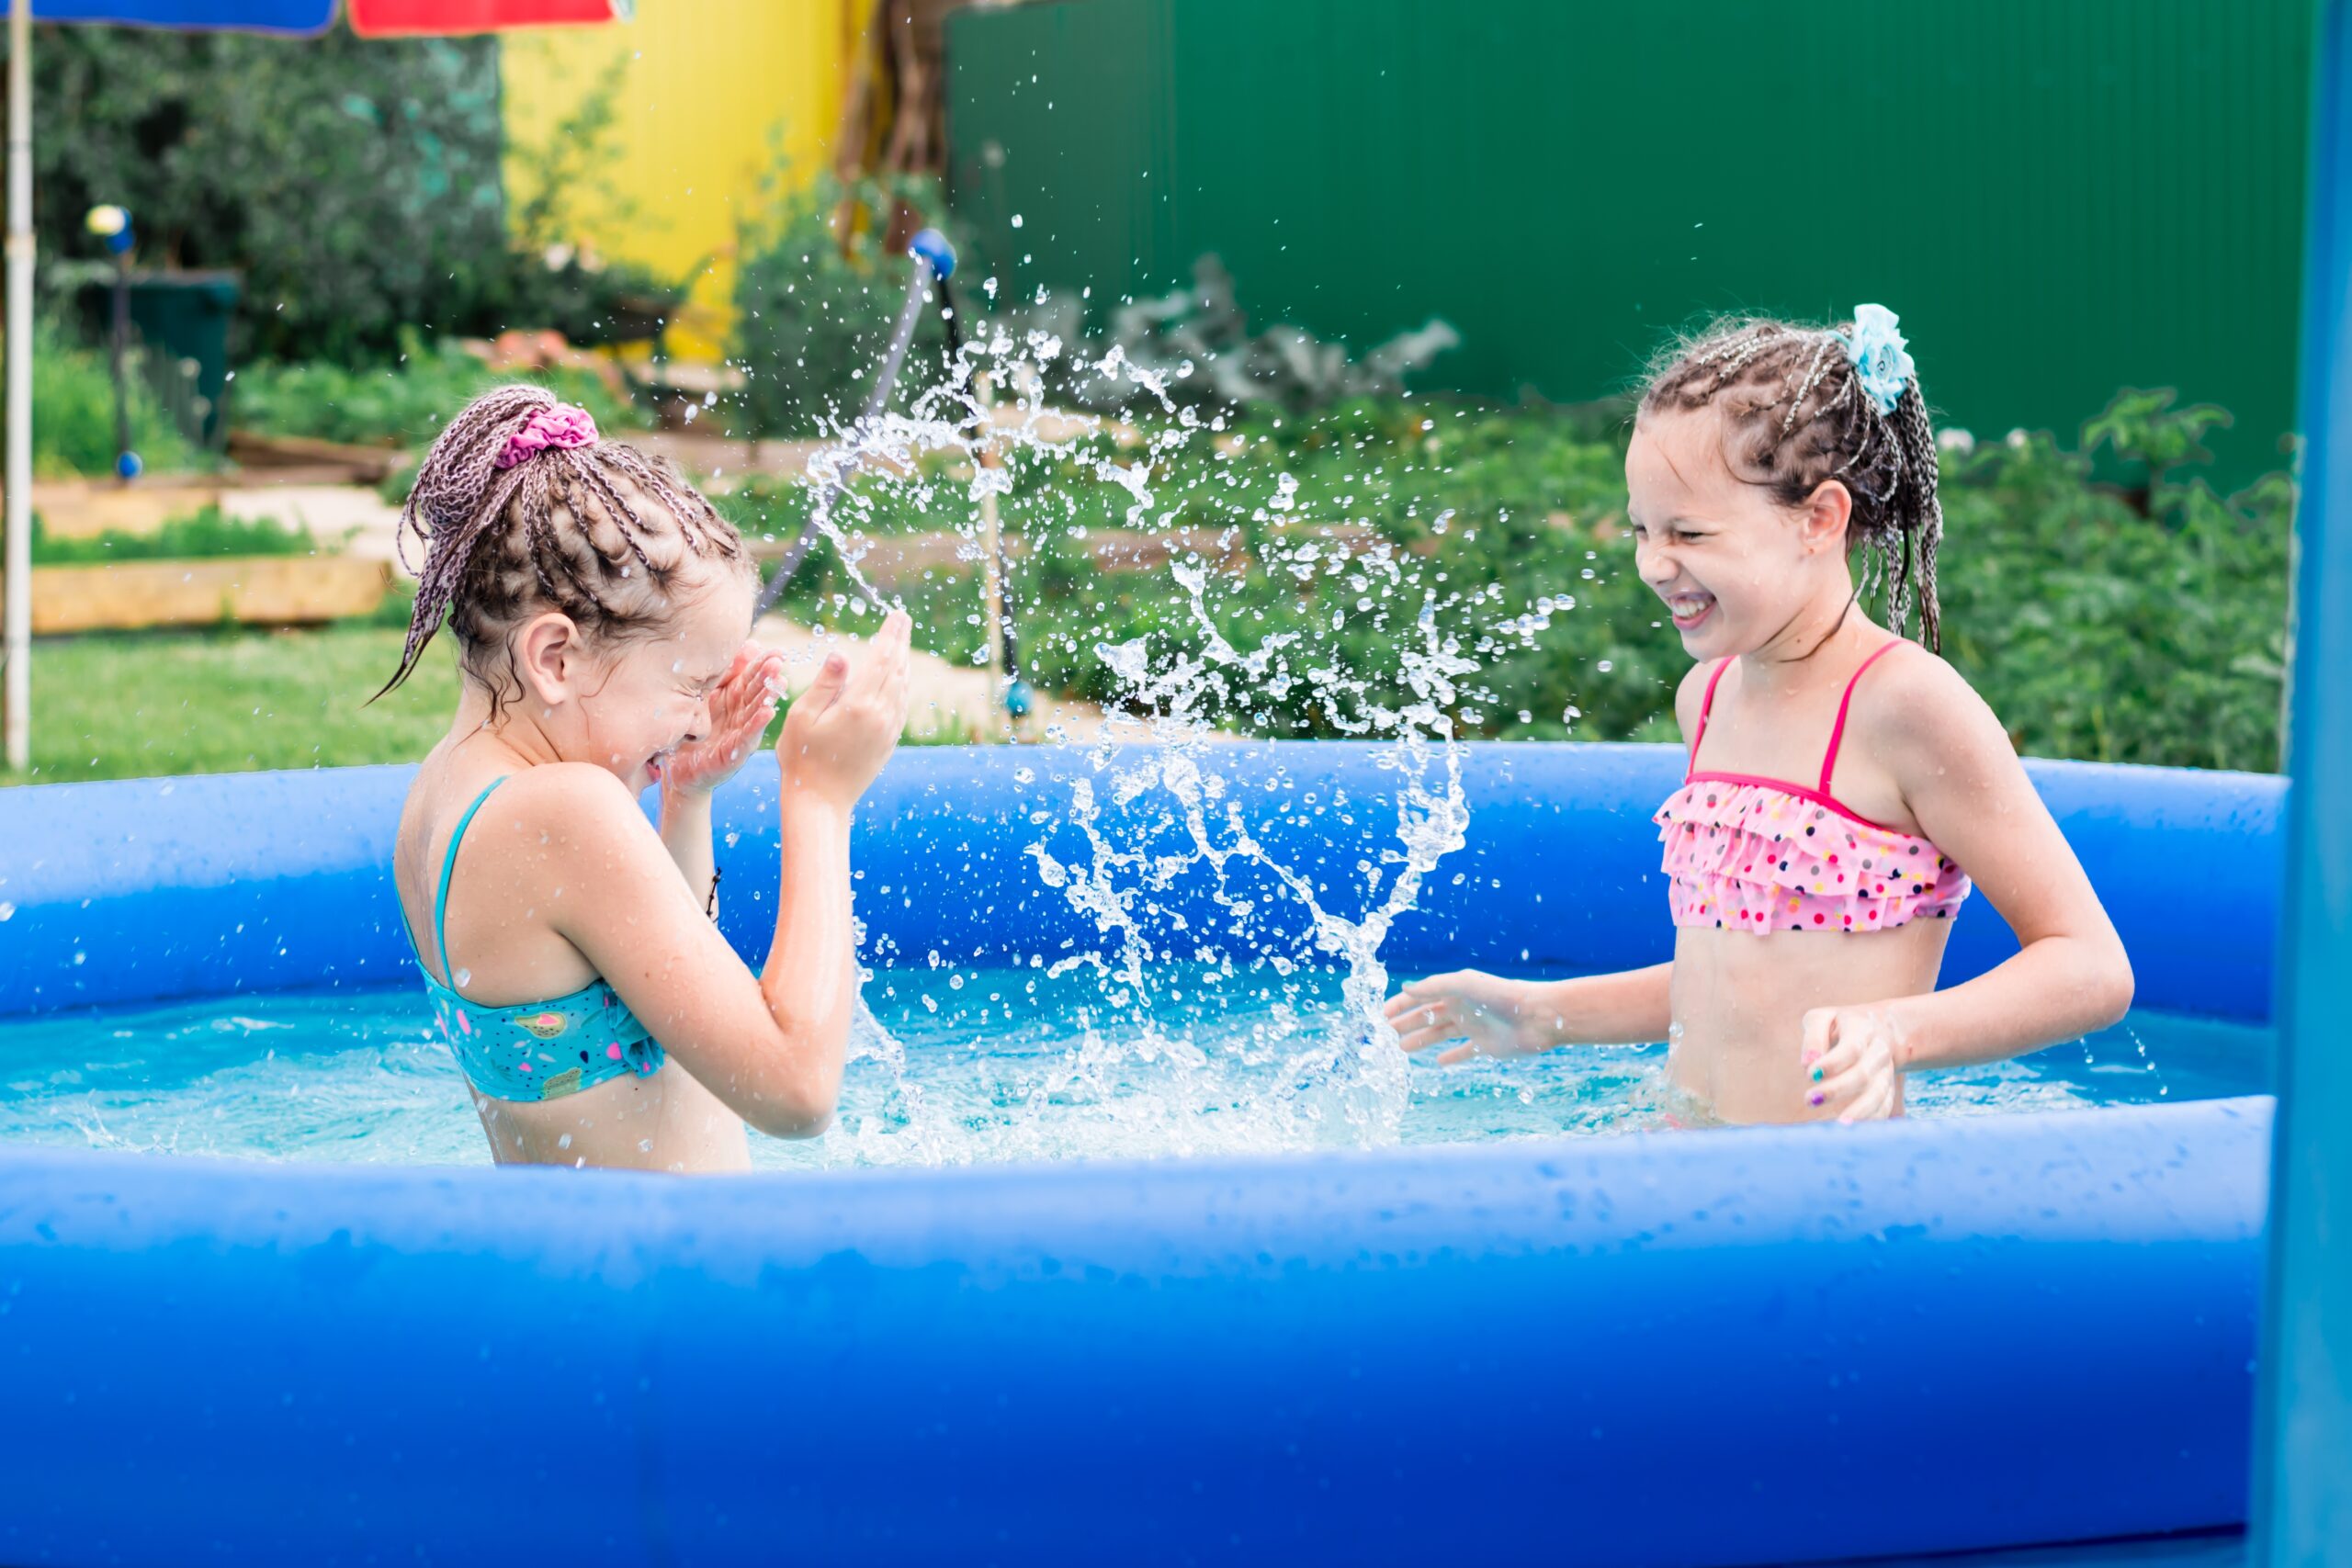 Two,Girls,Have,Fun,Splashing,In,An,Inflatable,Pool,On